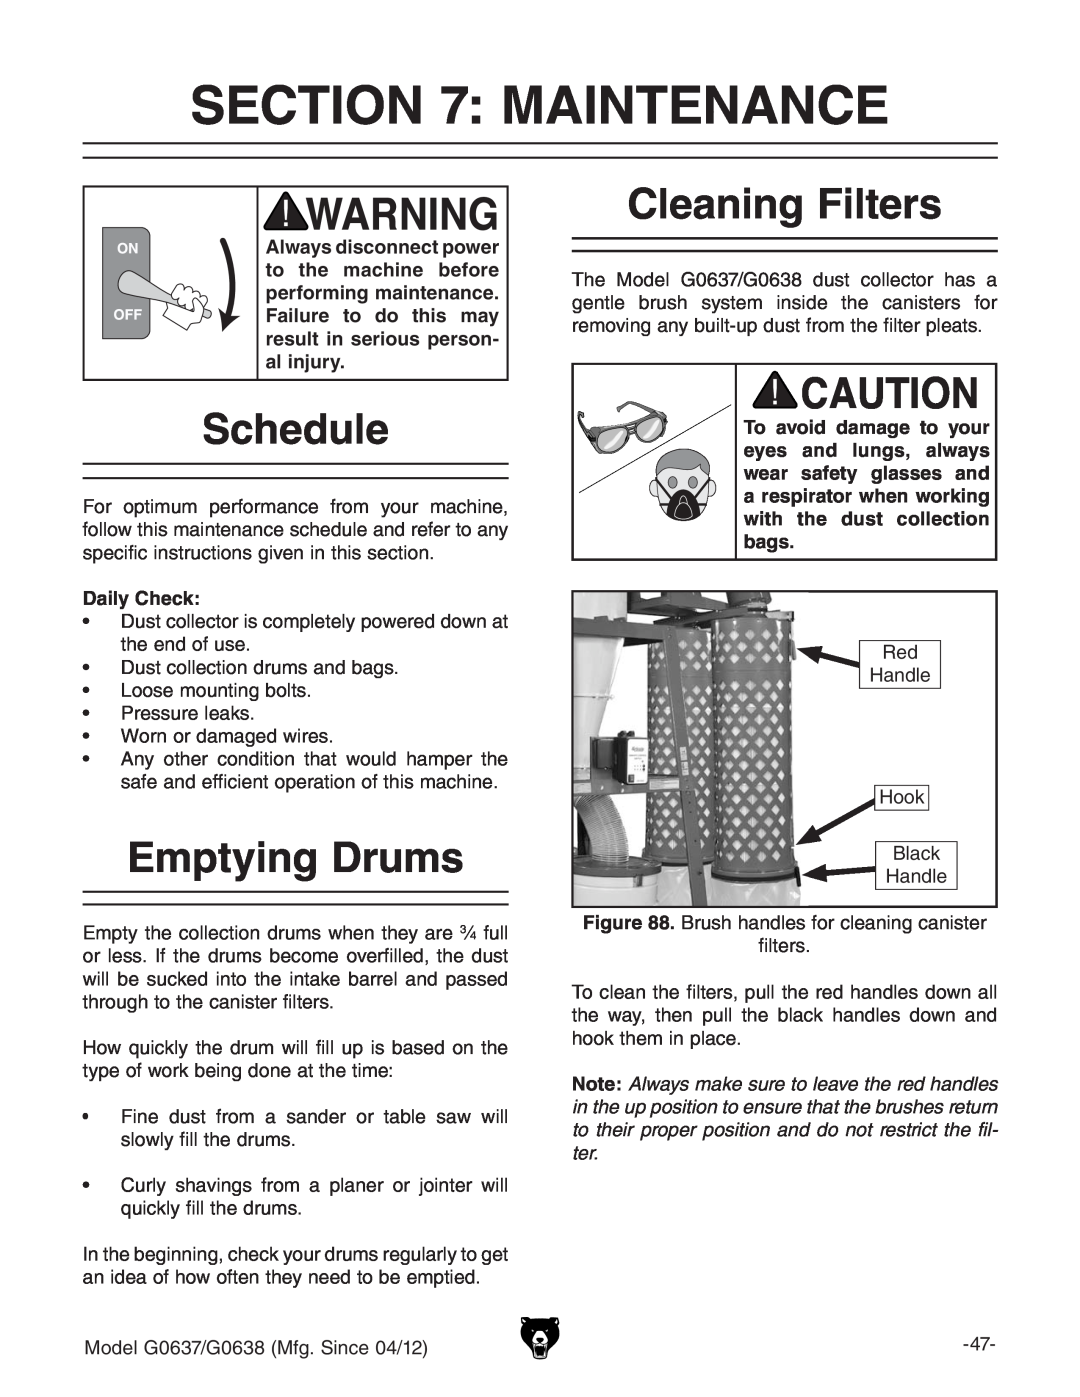 Grizzly G0637 owner manual Maintenance, Schedule, Emptying Drums, Cleaning Filters, Daily Check 